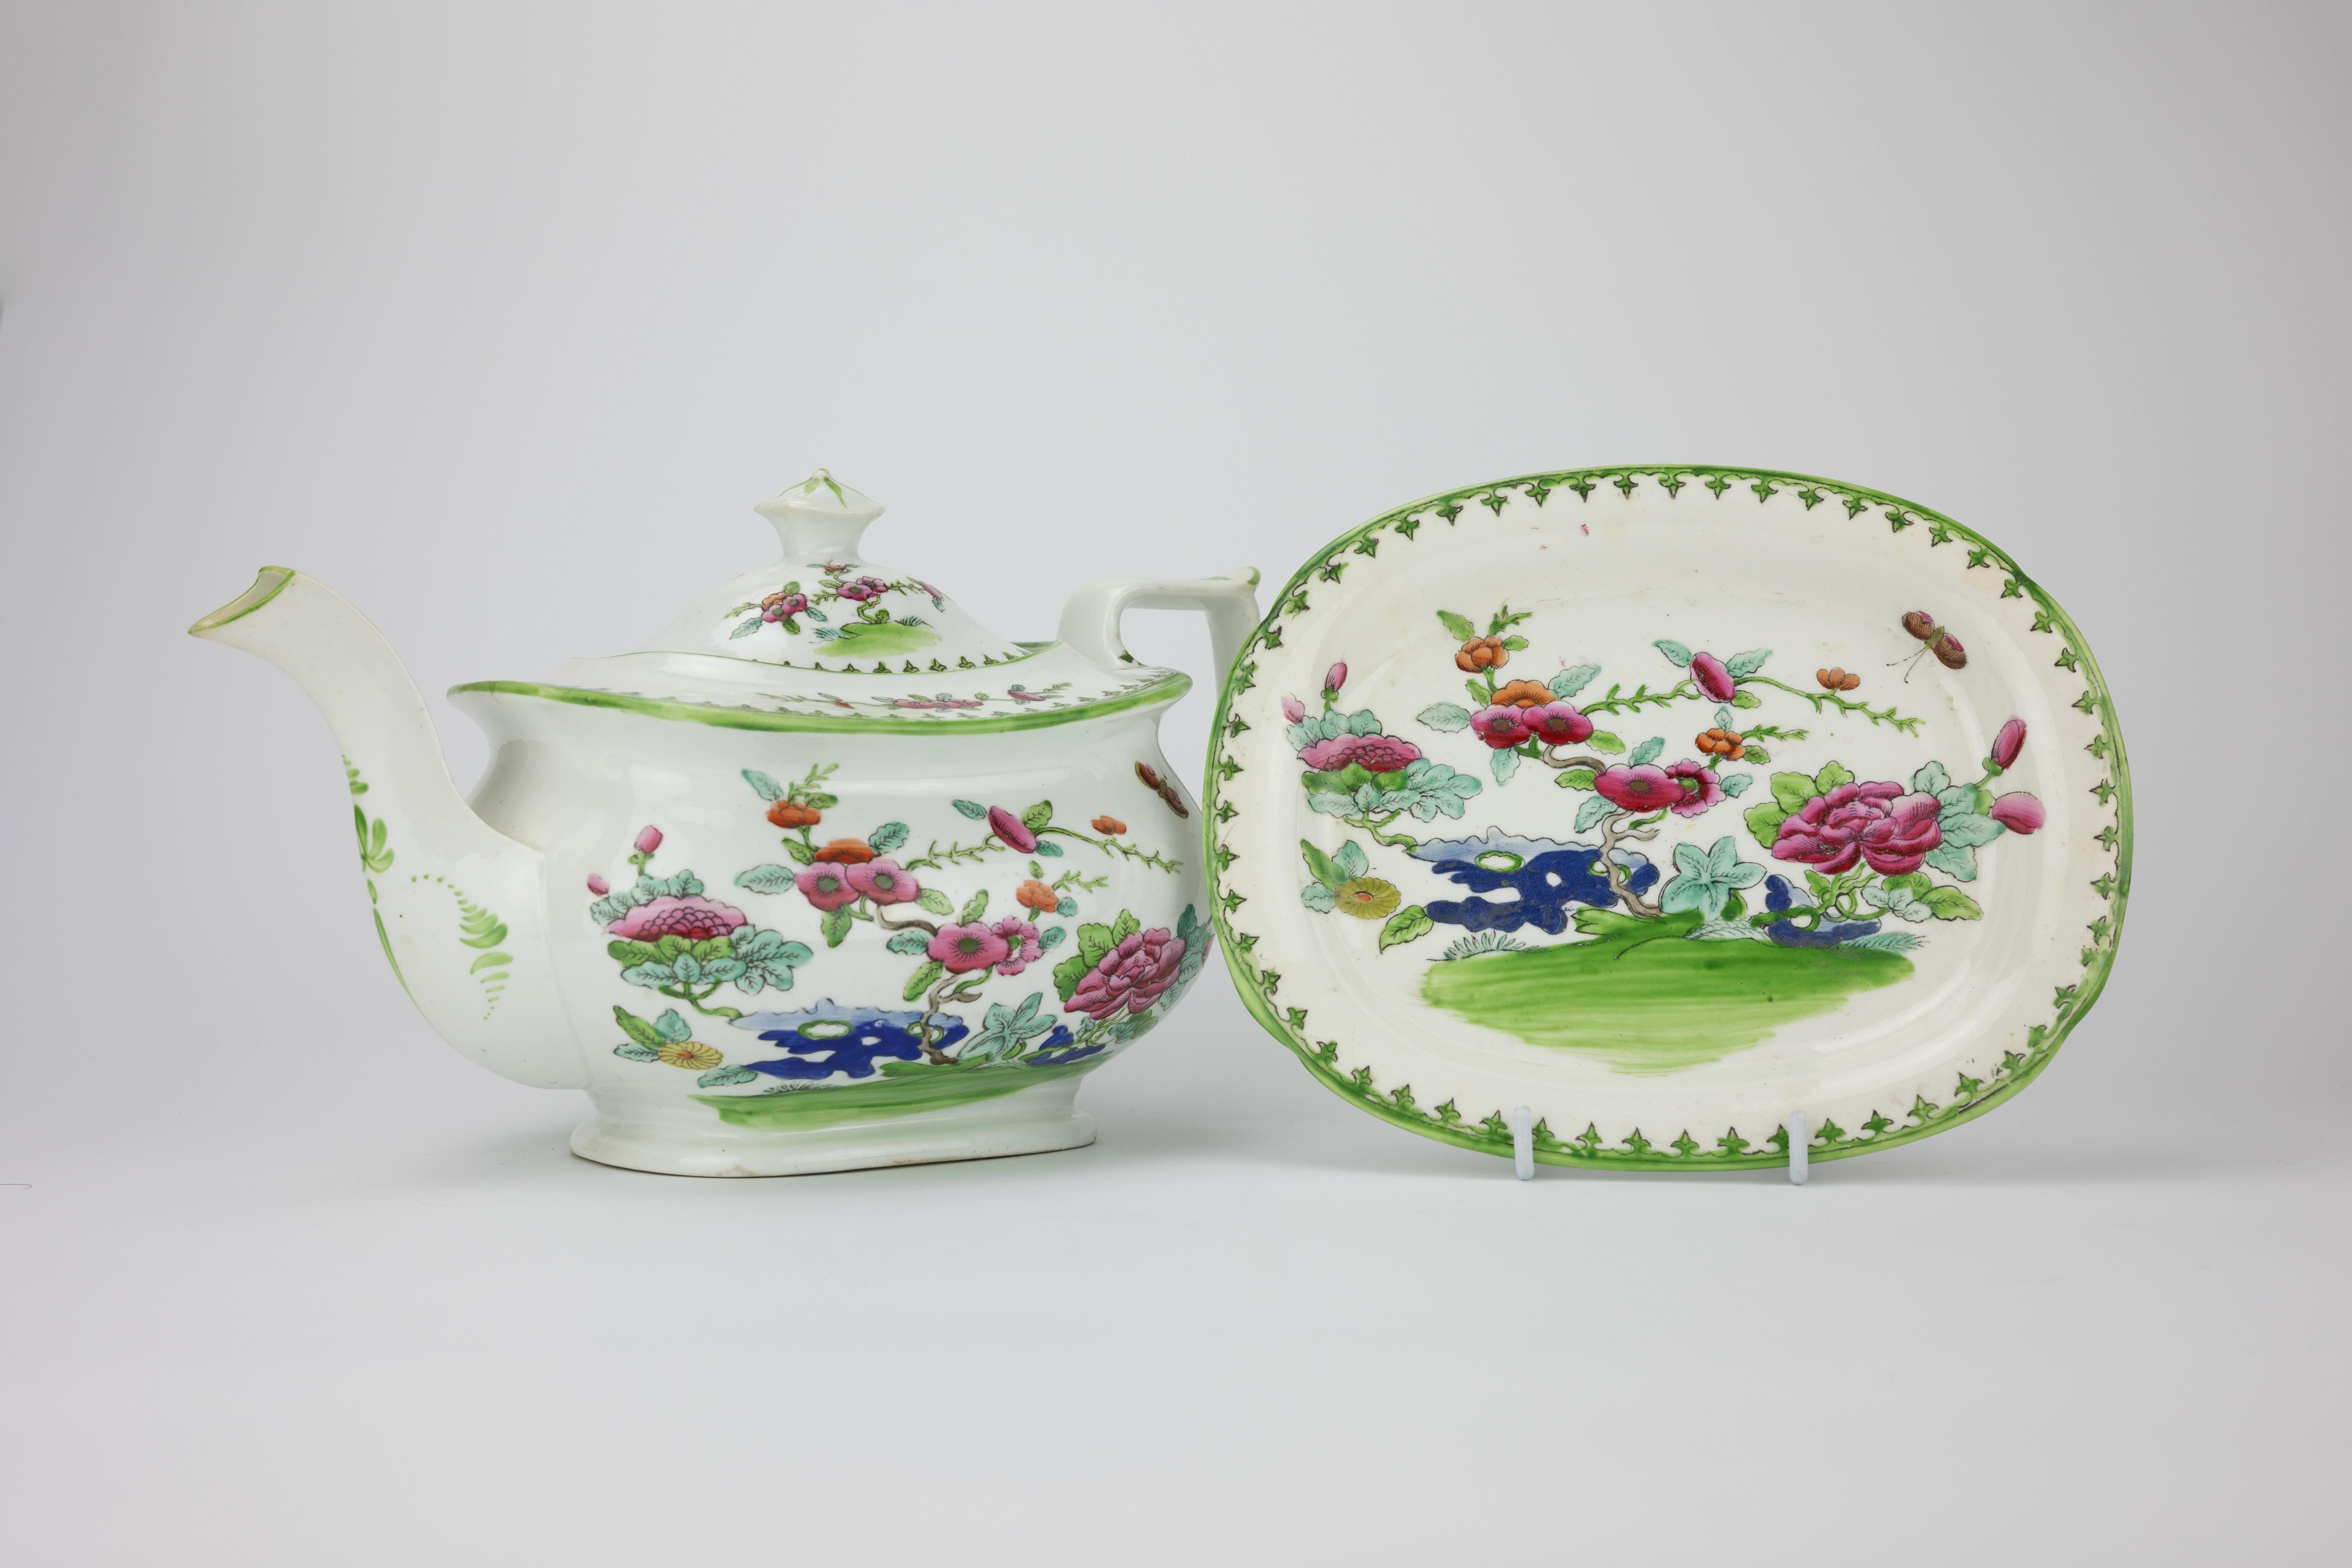 Hand-Painted 19th Century Staffordshire Porcelain Chinoiserie Tea Set